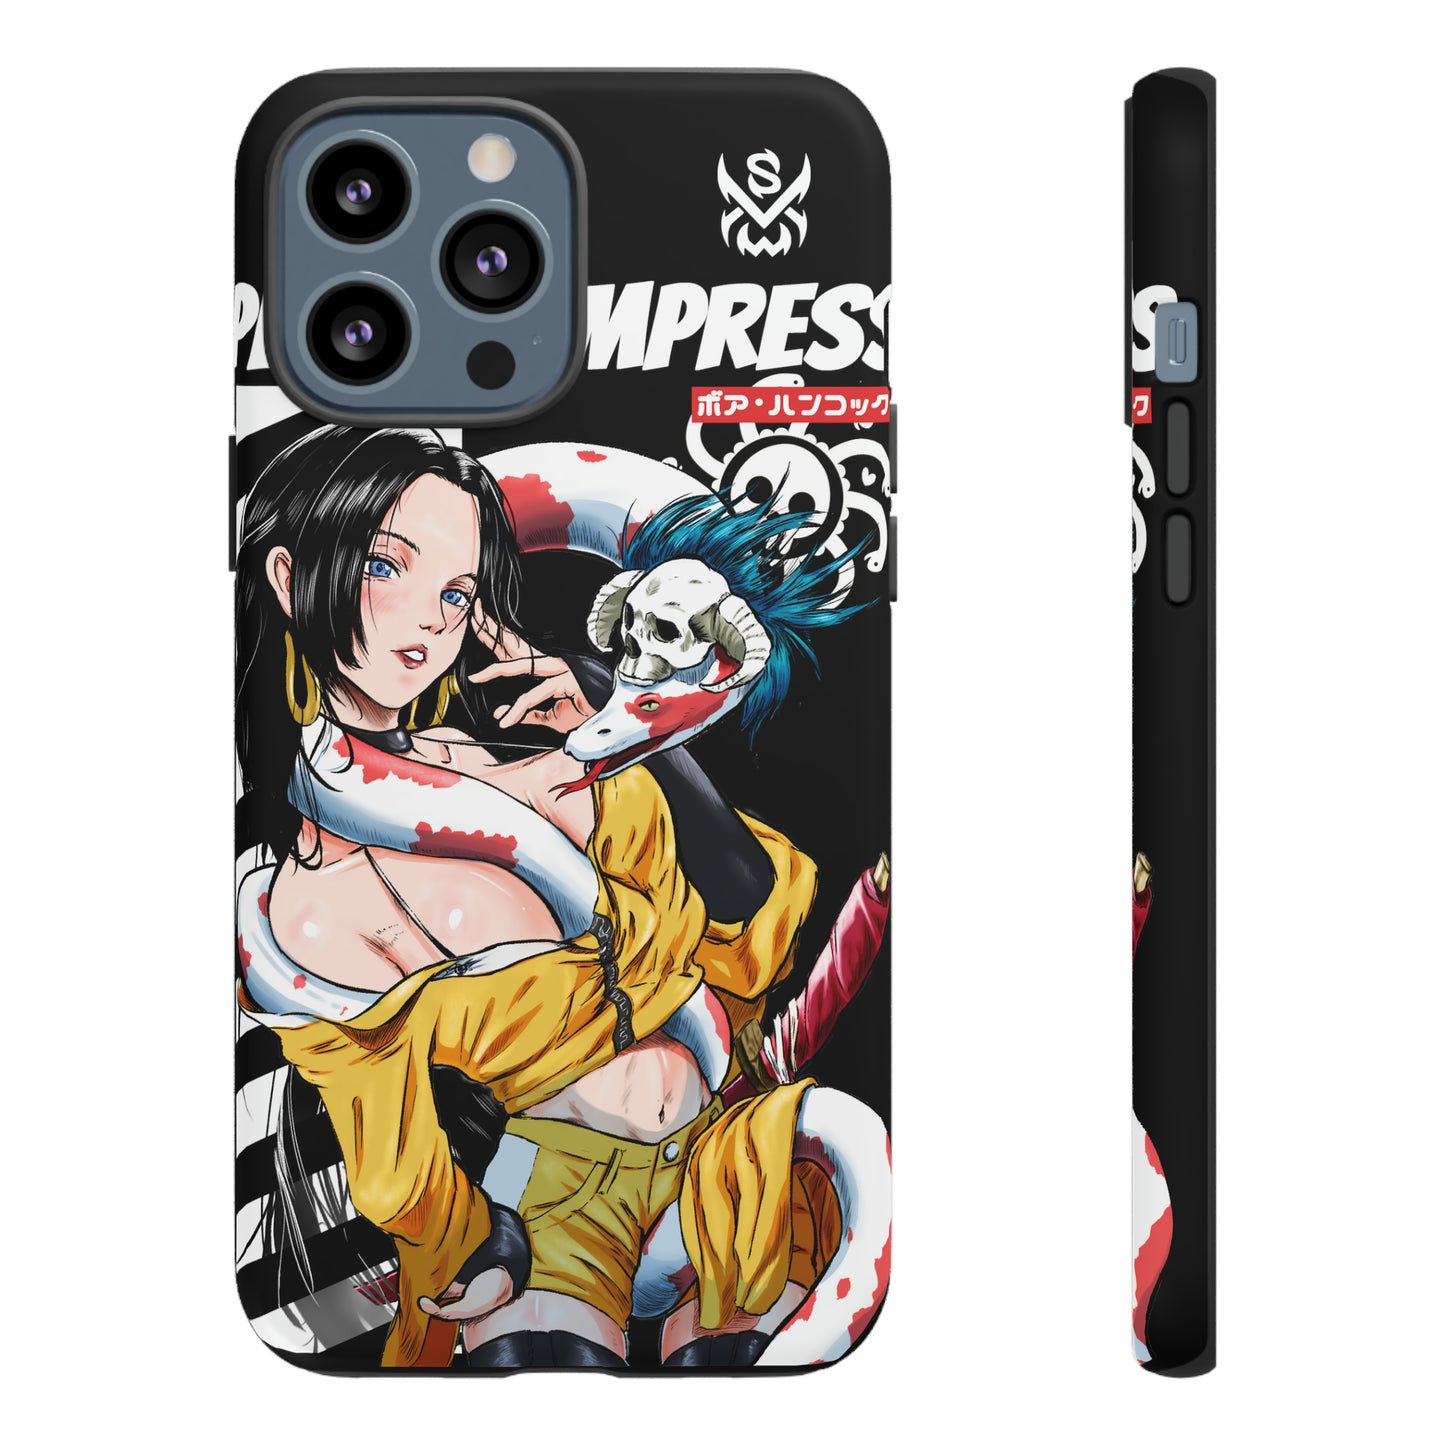 Empress / iPhone Case - LIMITED